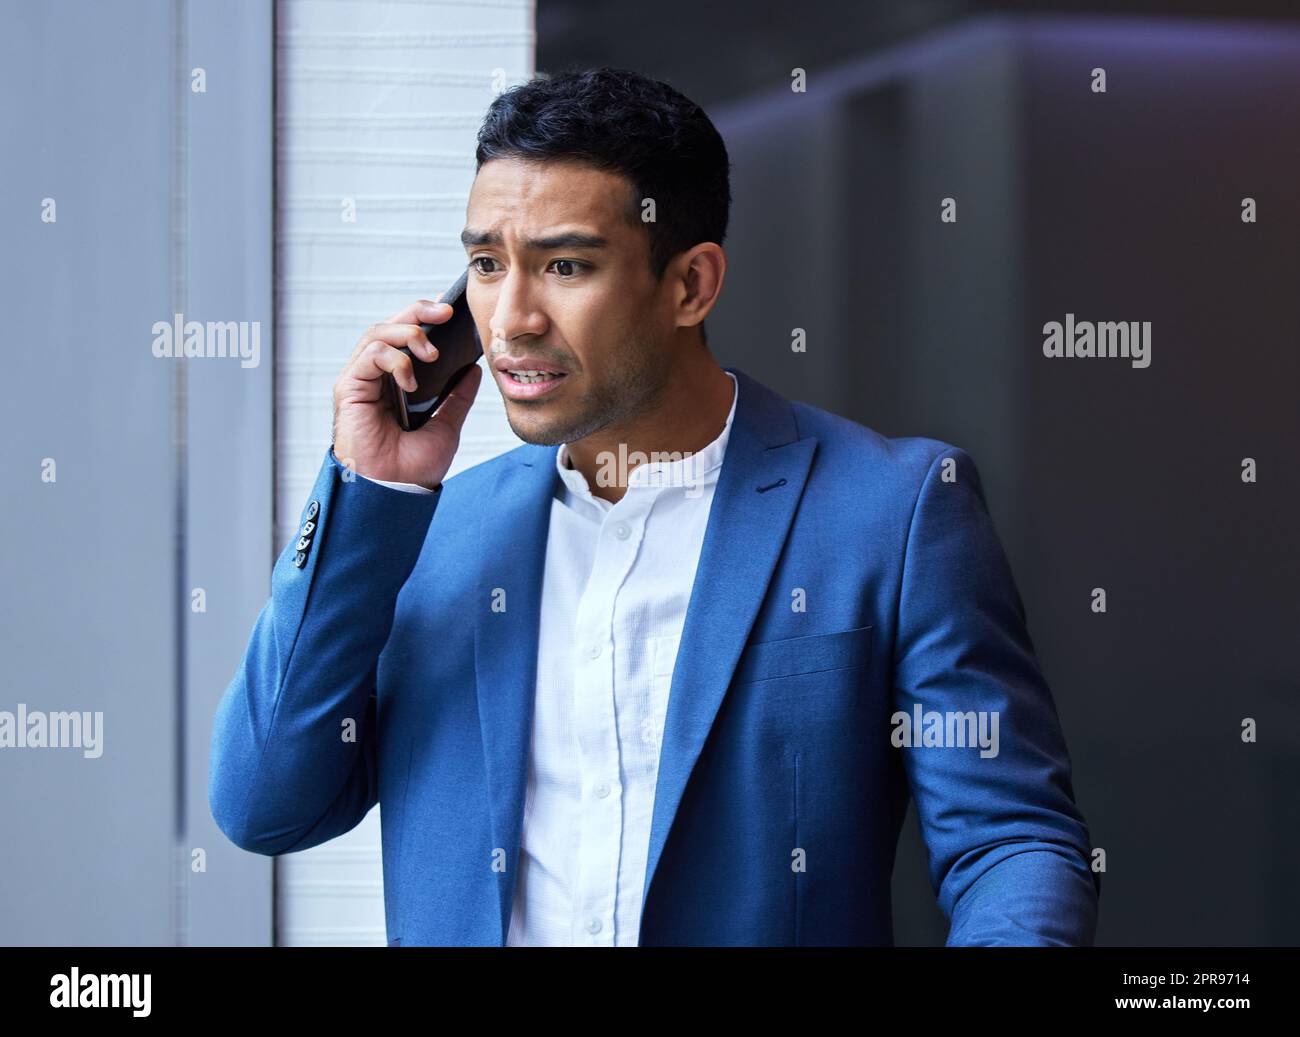 Some of your greatest pains become your greatest strengths. a young man using his phone at work. Stock Photo